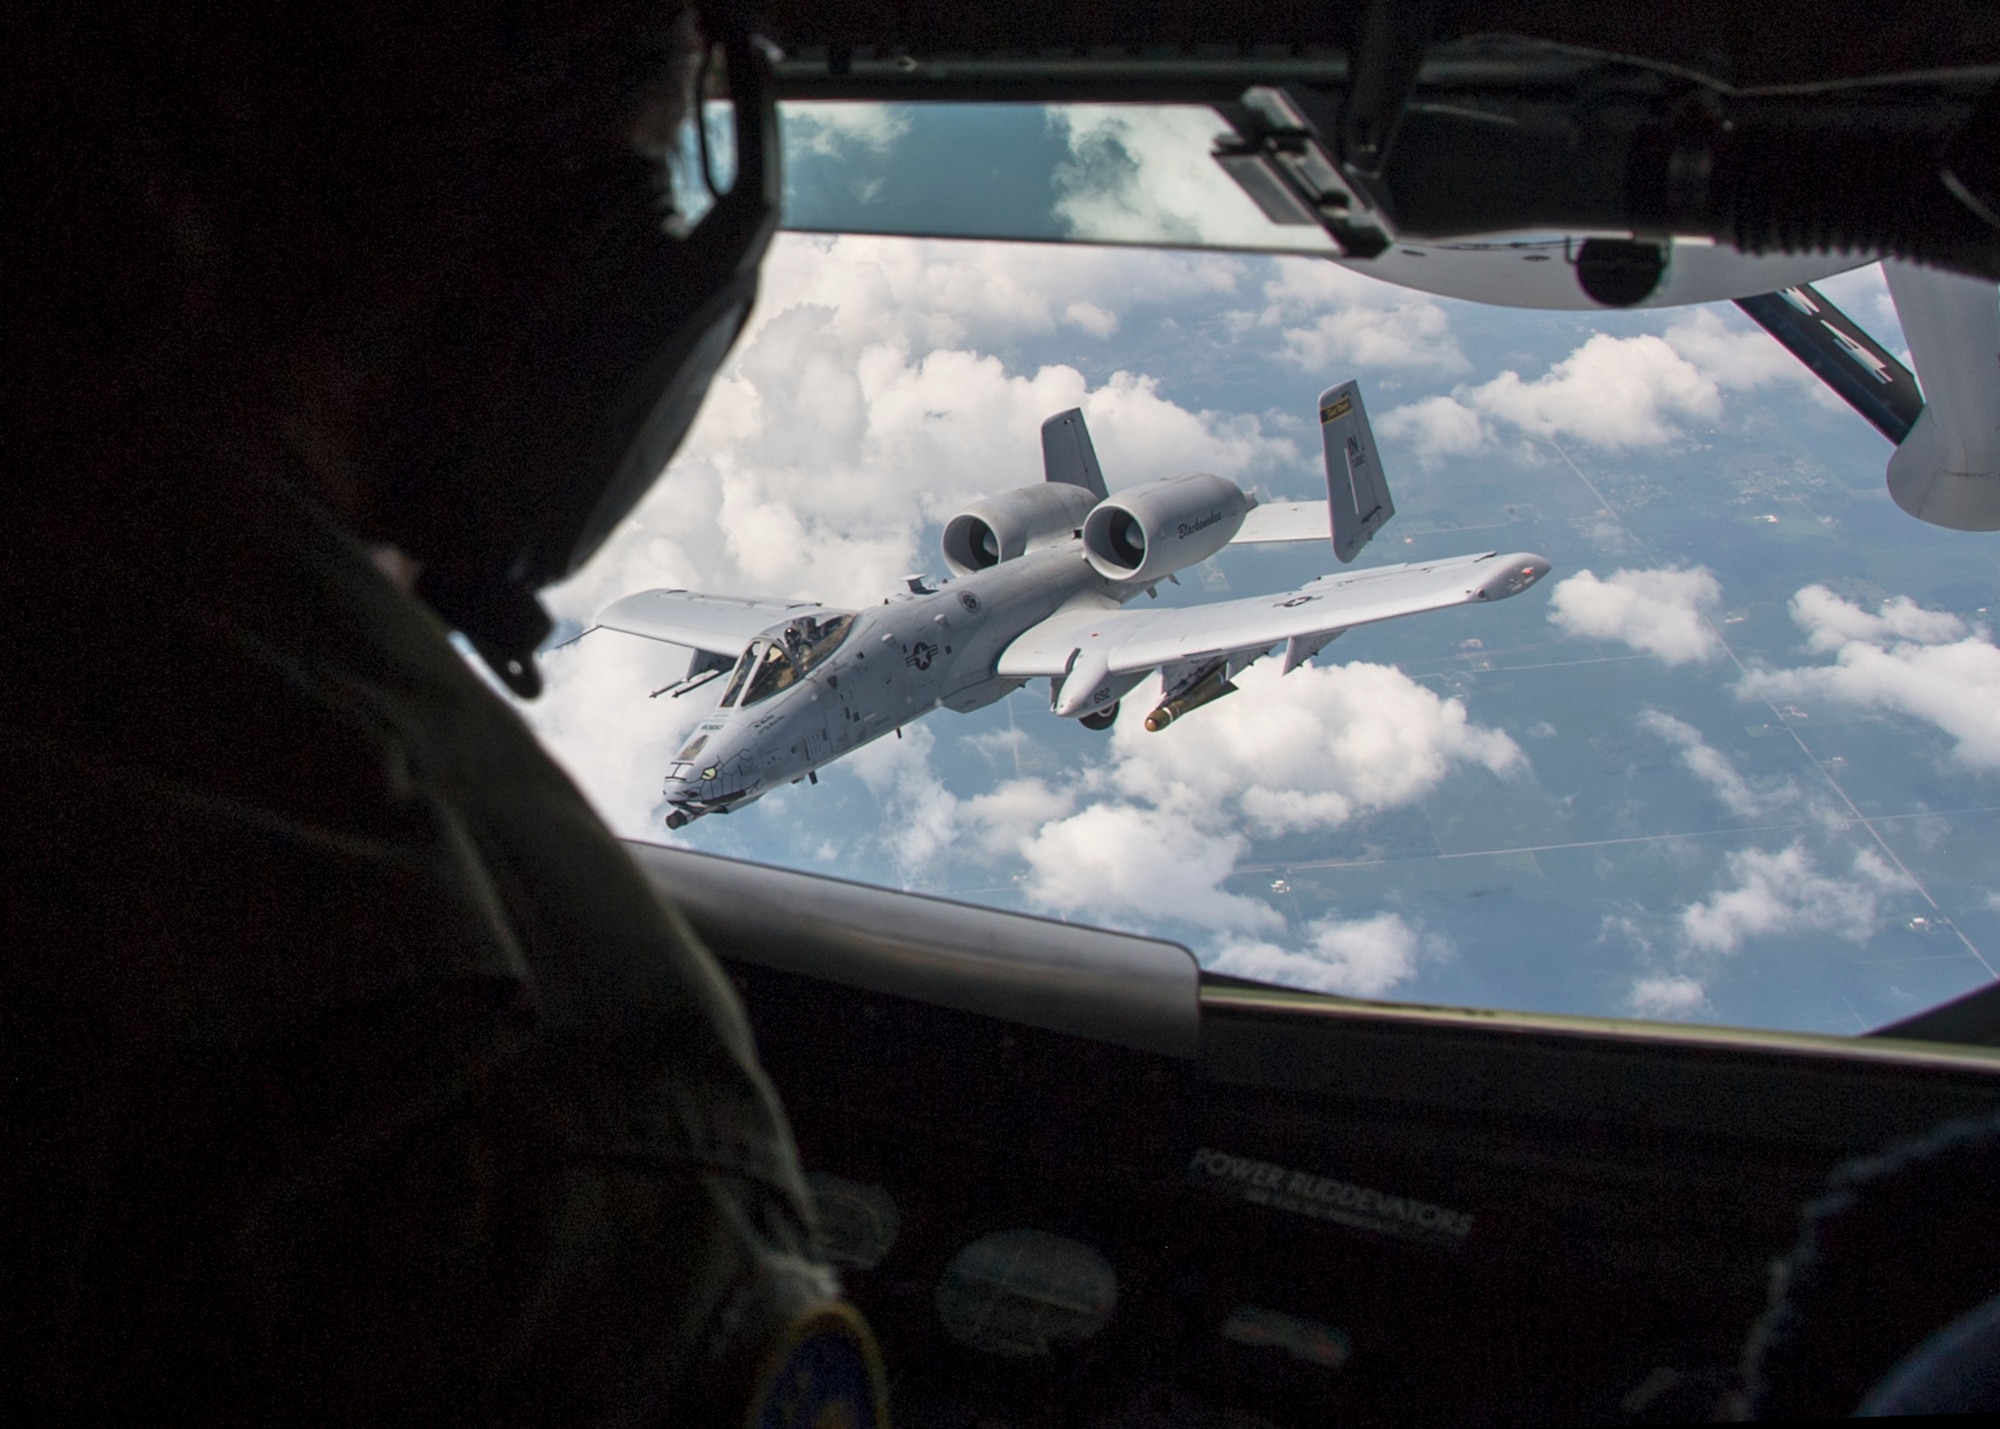 Tech. Sgt. Courtney Storey, 72nd Air Refueling Squadron inflight refueling technician, watches as an A-10 Warthog from the 122nd Fighter Wing, Fort Wayne, Ind., breaks away after inflight refueling over the Midwest Aug. 19, 2016. More than 40 people, nominated by Guard and Reserve members from the 434th ARW, the 122th Fighter Wing in Fort Wayne, Ind., and the 181st Intelligence Wing in Terre Haute Ind., had a hands-on tour of the base that concluded with an air refueling mission. (U.S. Air Force photo/Staff Sgt. Katrina Heikkinen)